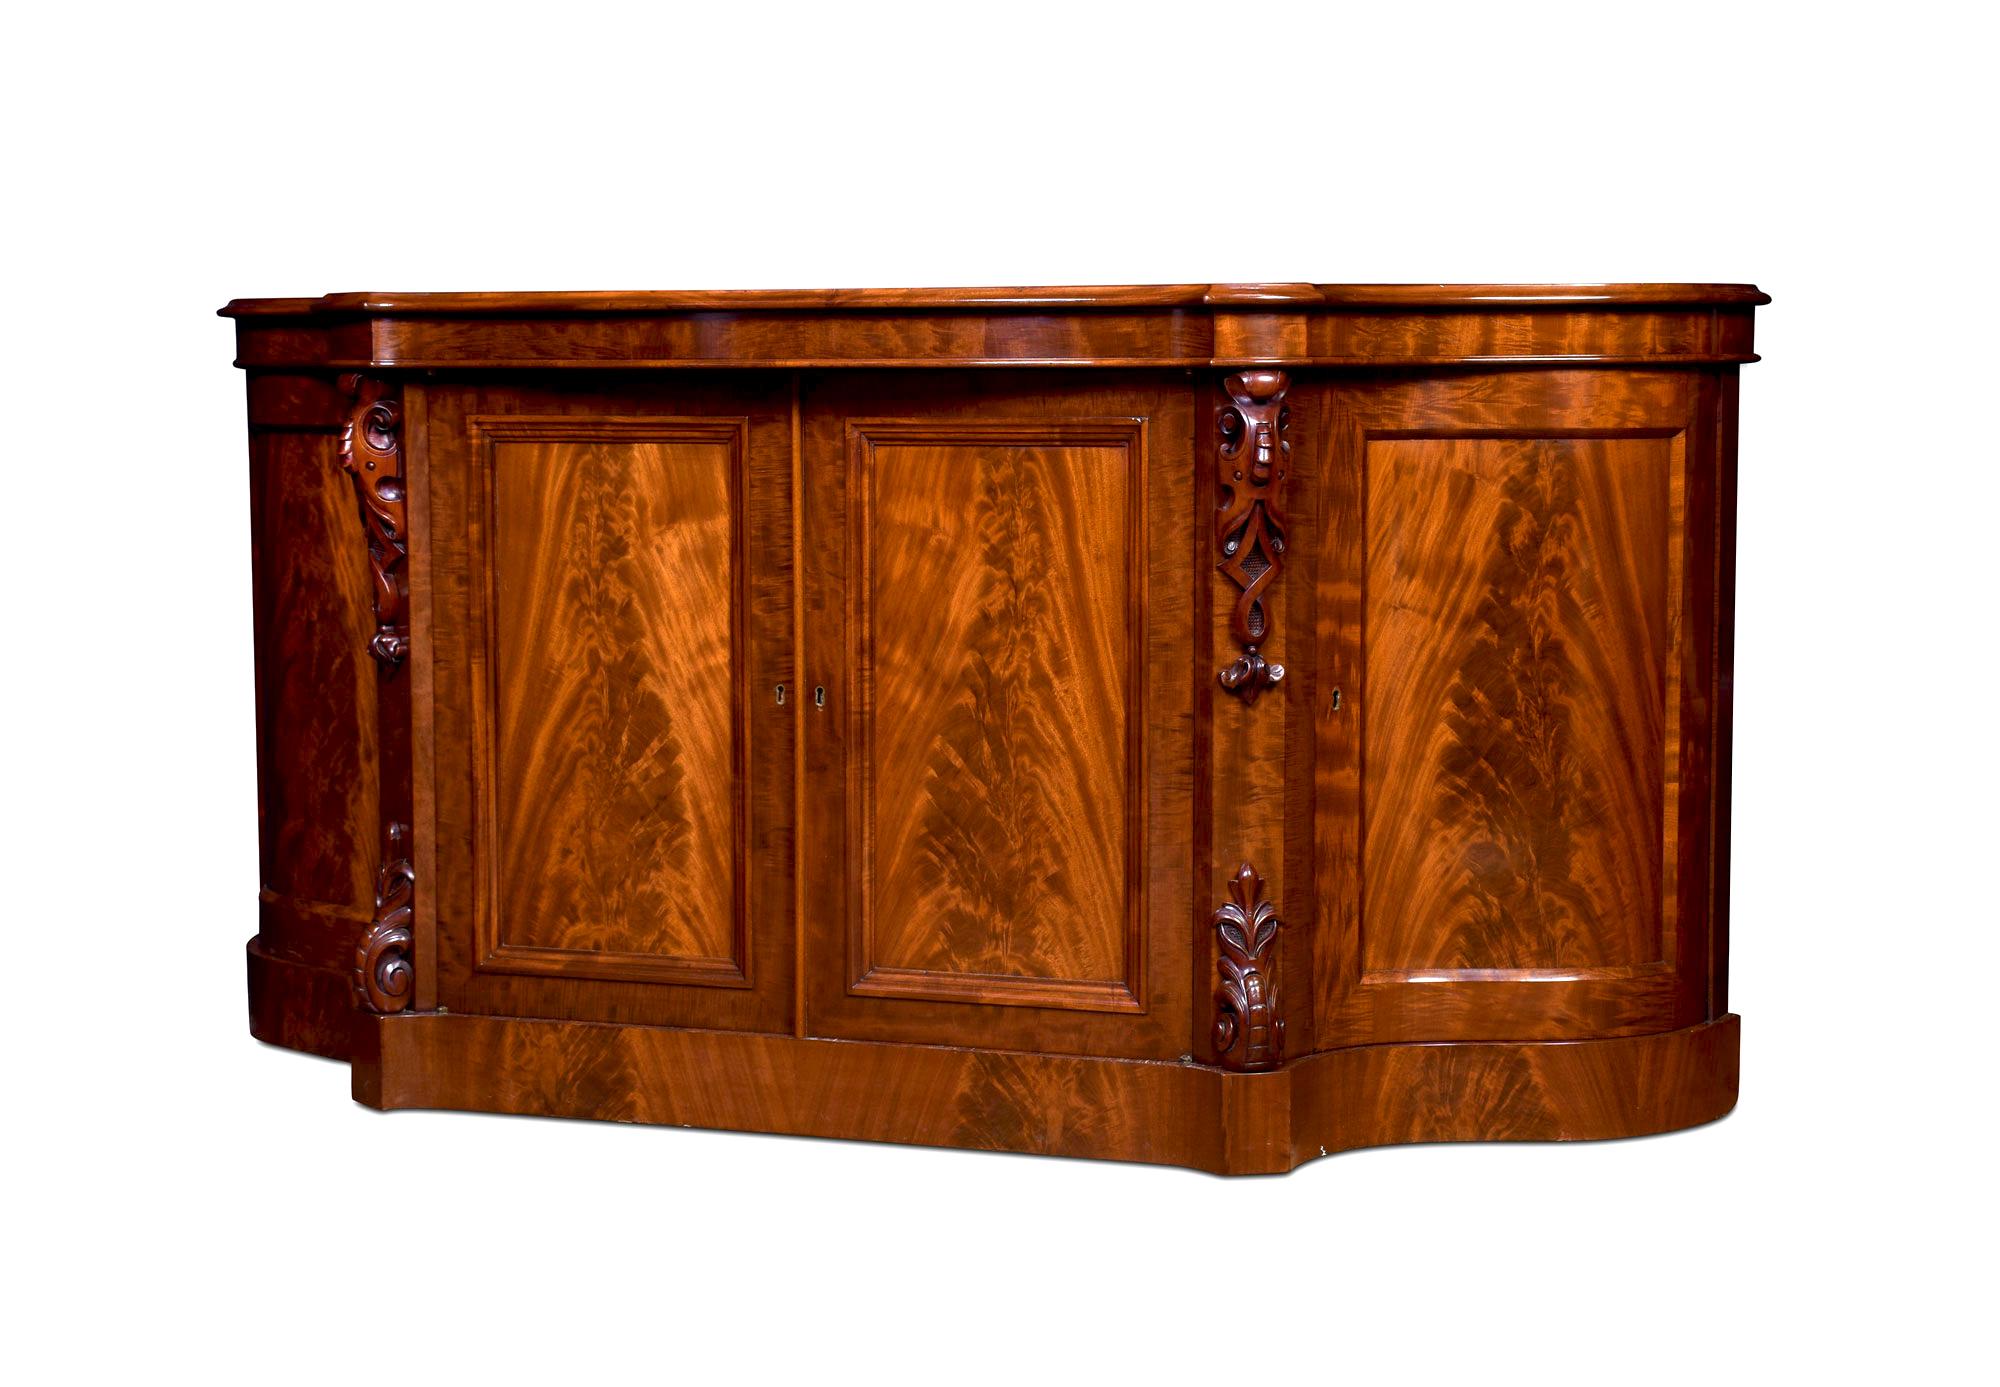 Mahogany chiffonier /sideboard, the long shaped moulded top above a plain frieze and a pair of central cupboard doors opening to reveal a shelved interior. Flanked by serpentine cupboard doors. All raised up on a plinth base.
Dimensions:
Height